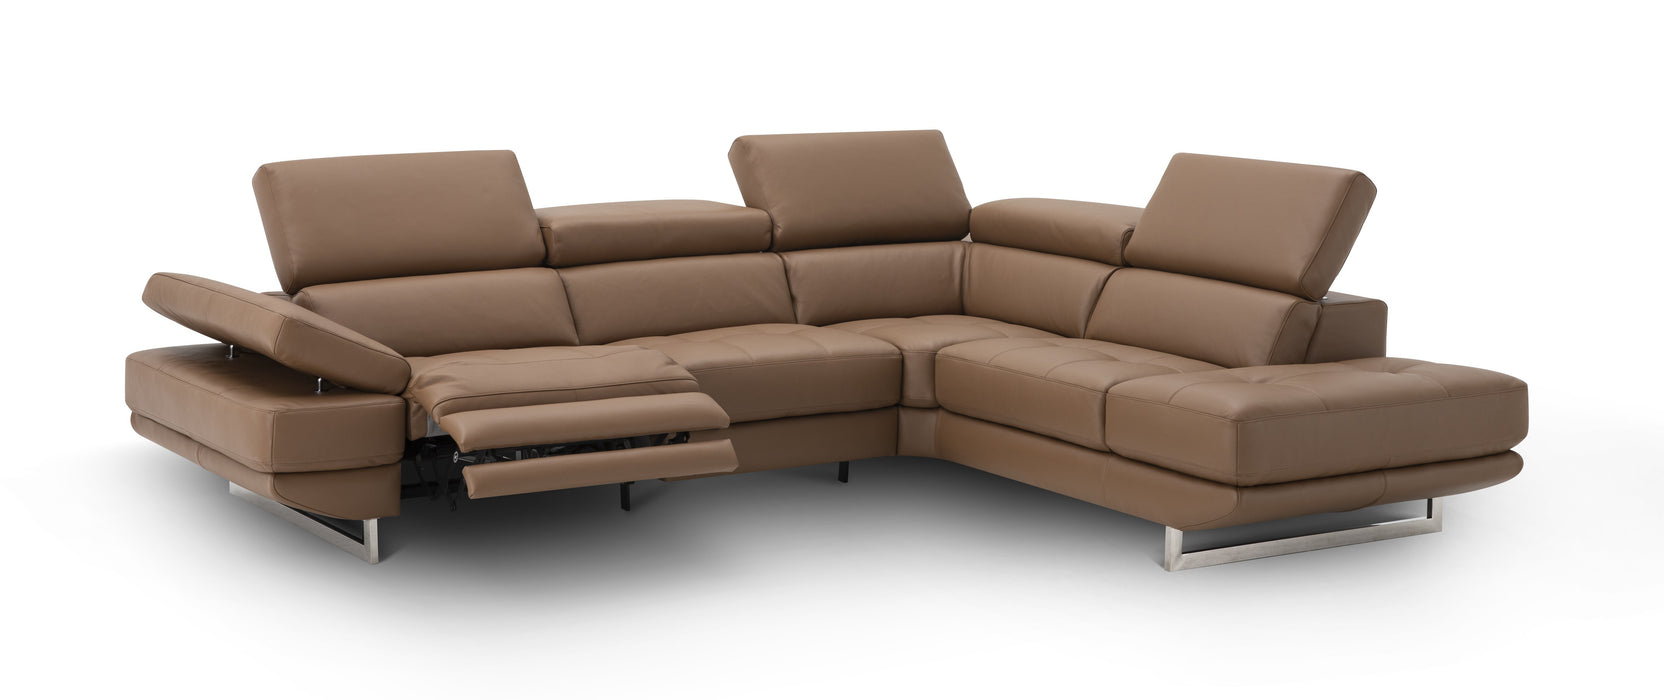 J&M Furniture - The Annalaise Recliner Leather Right Hand Chaise Sectional in Caramel - 19944-RHFC